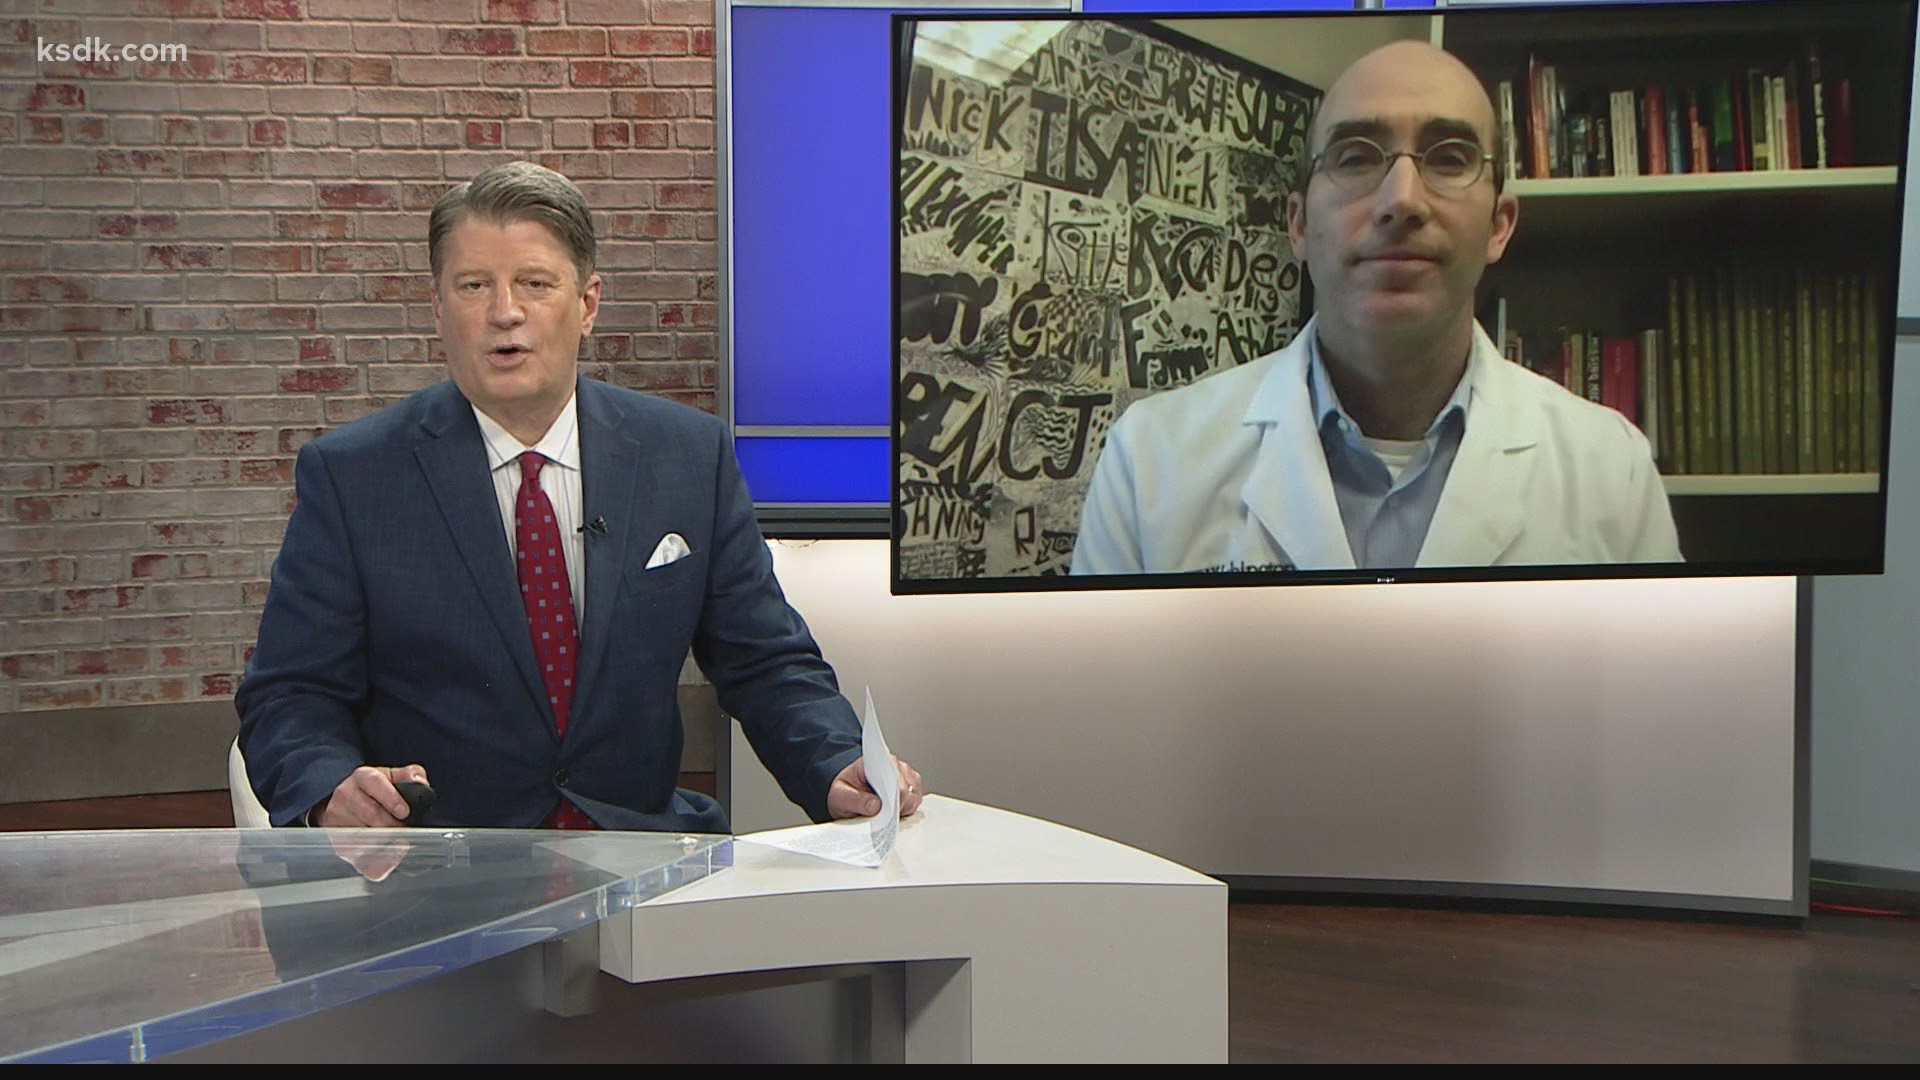 Dr. Jason Newland with Washington University answers COVID-19 questions from viewers